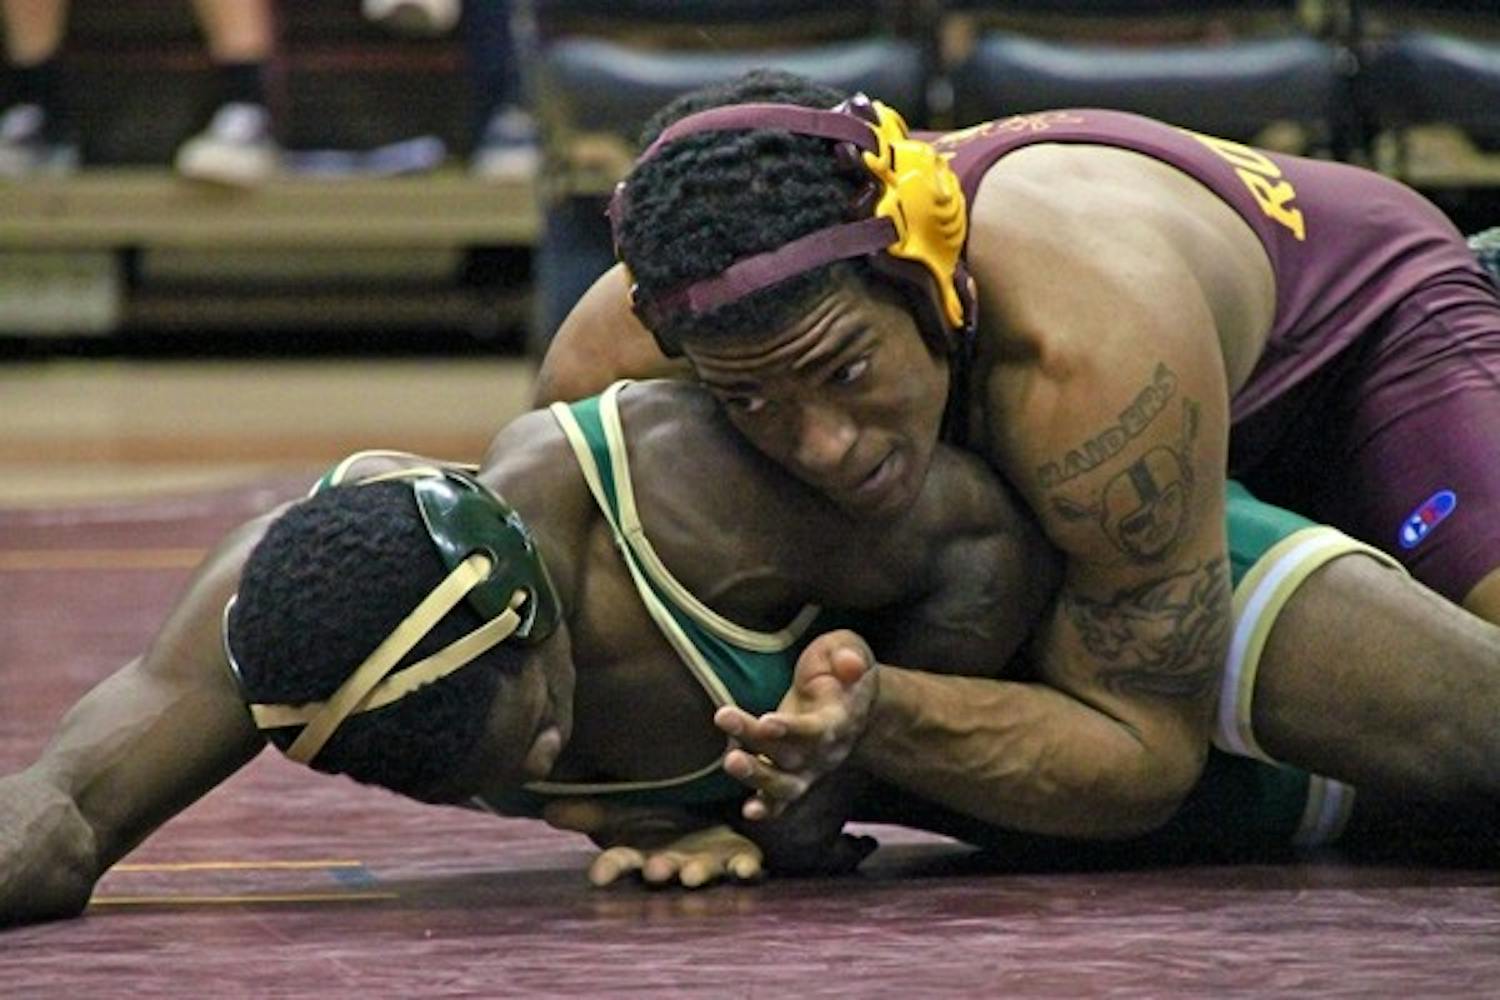 Finishing Strong: ASU senior Anthony Robles rides Cal Poly’s Britain Longmire during Robles’ 16-0 technical fall victory on Jan 30. The Sun Devils head up to face No. 21 Oregon State and Stanford this weekend to close out the regular season. (Photo by Rosie Gochnour)